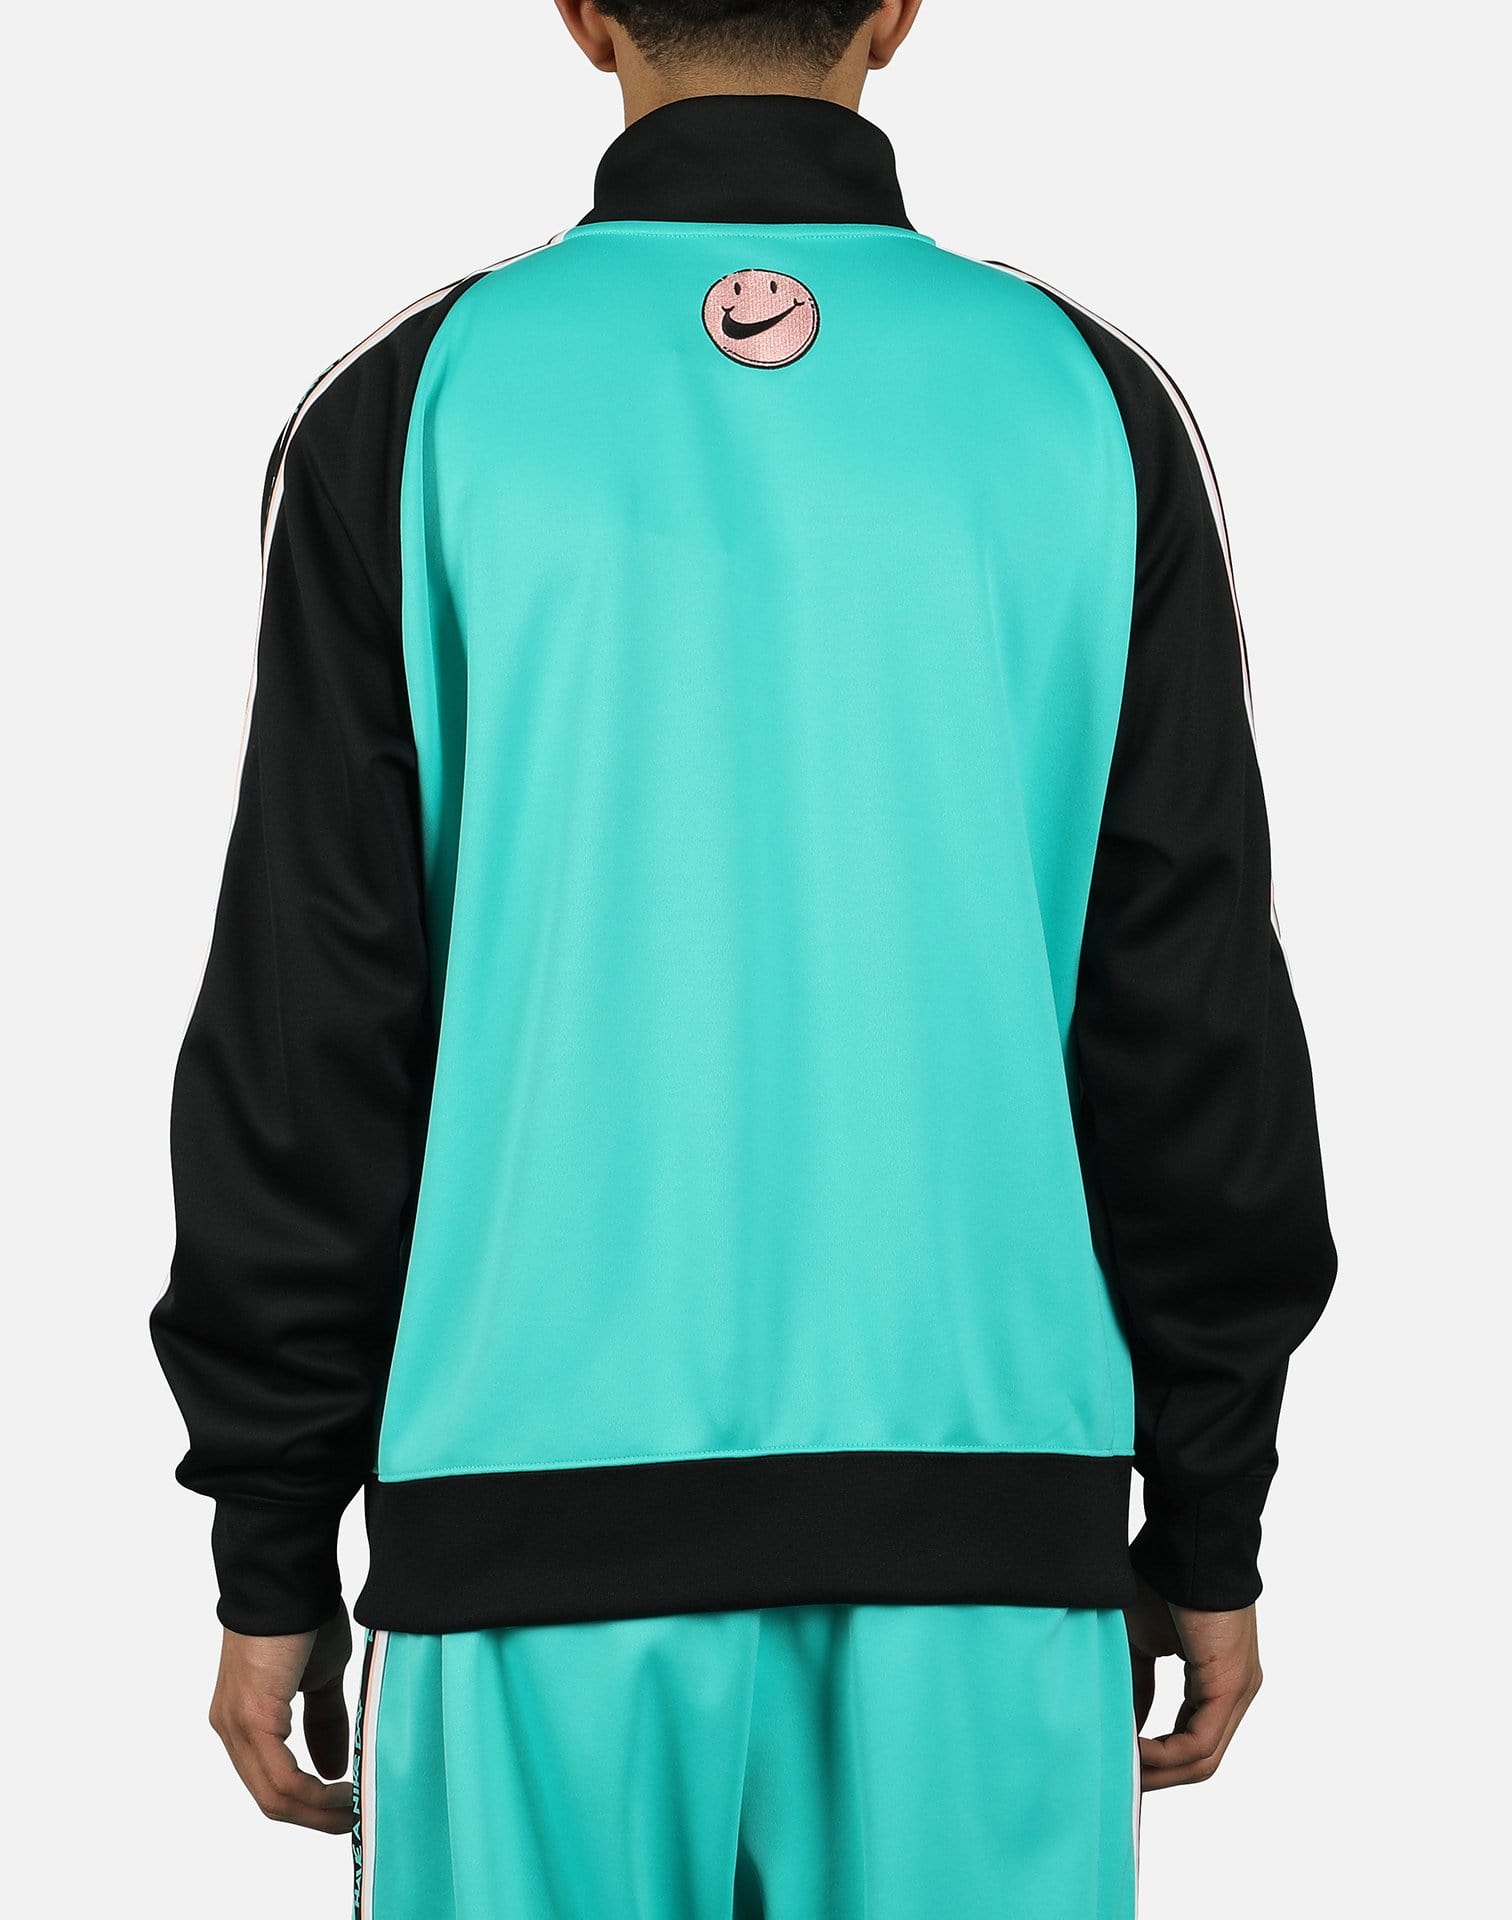 Nike Men's 'Have A Nike Day' Tribute Track Jacket